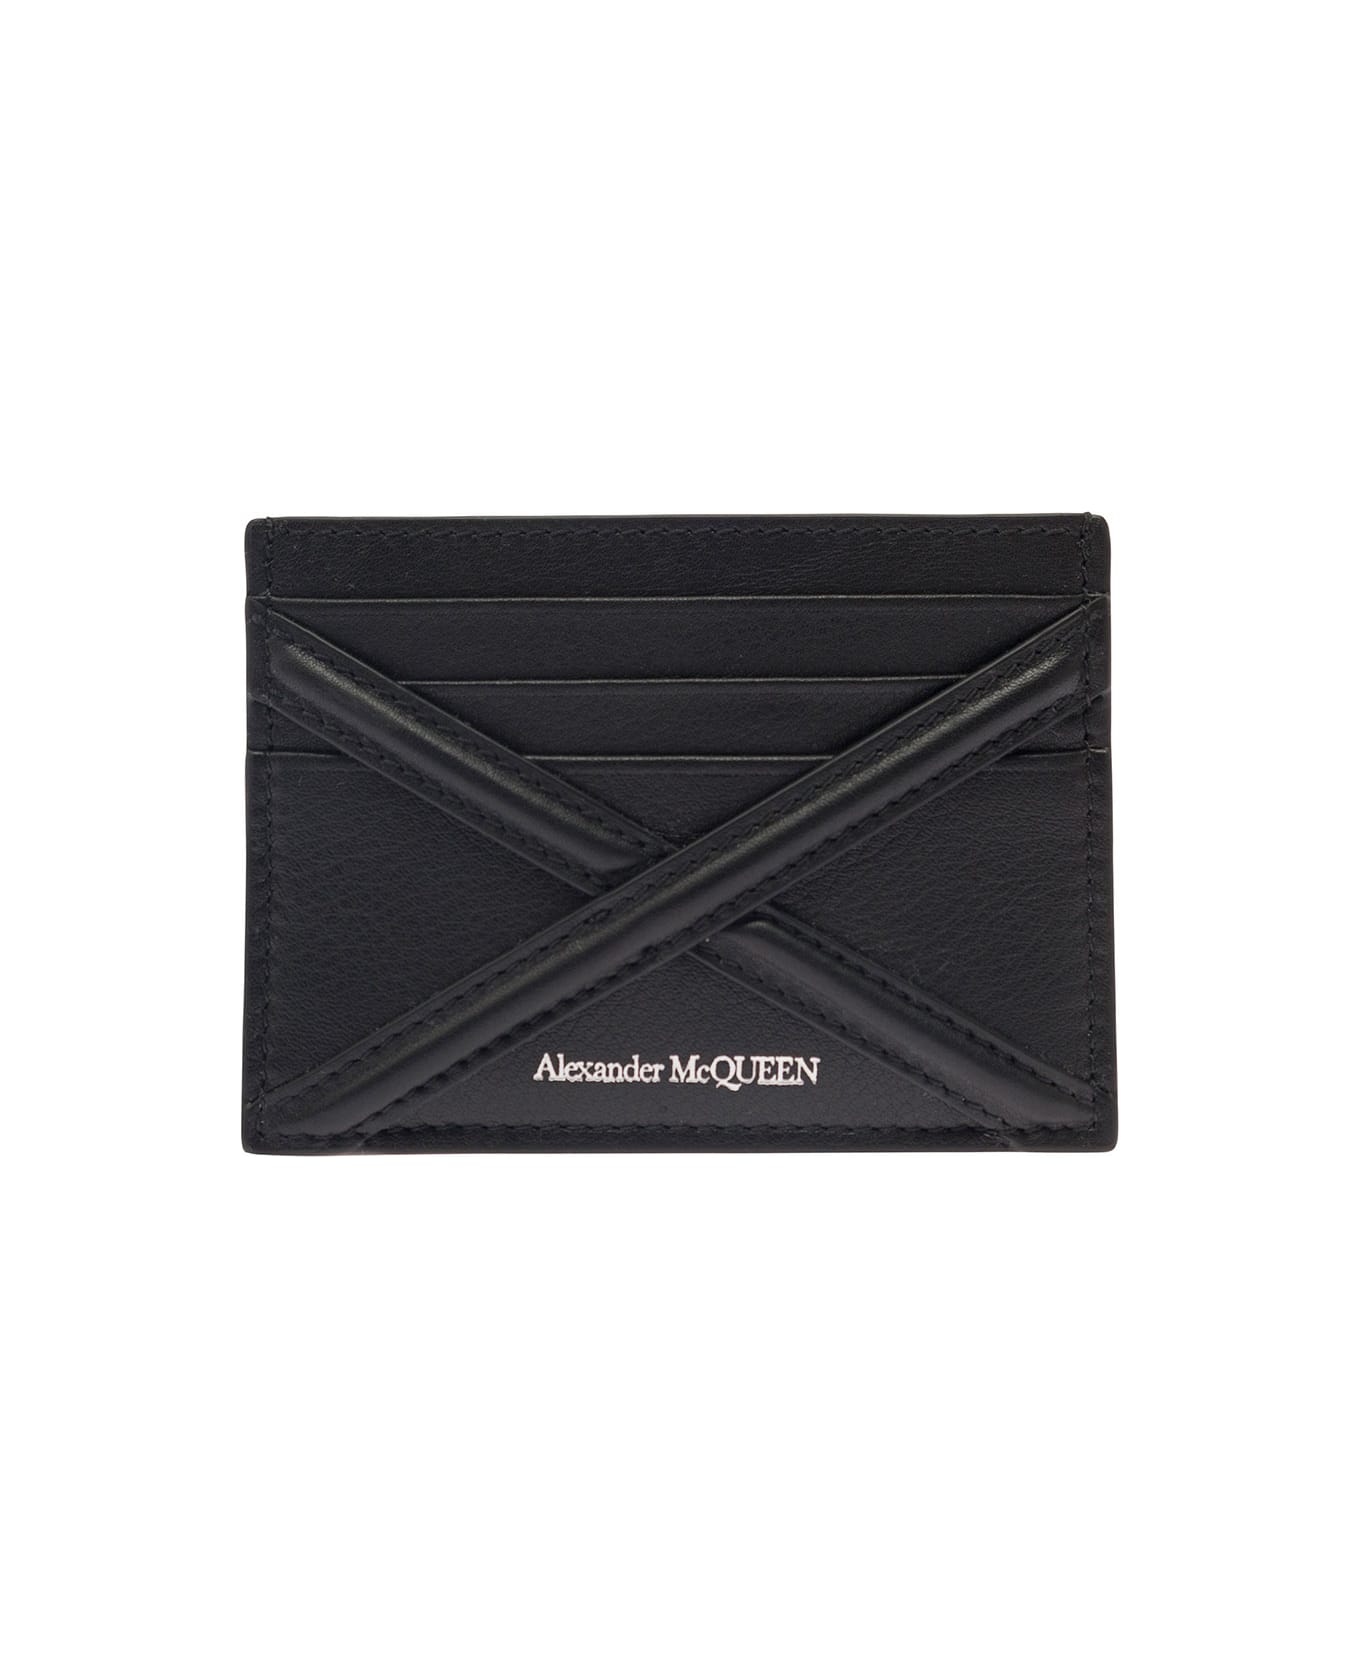 Alexander McQueen Black Card-holder With Harness Detail In Leather Man - Black